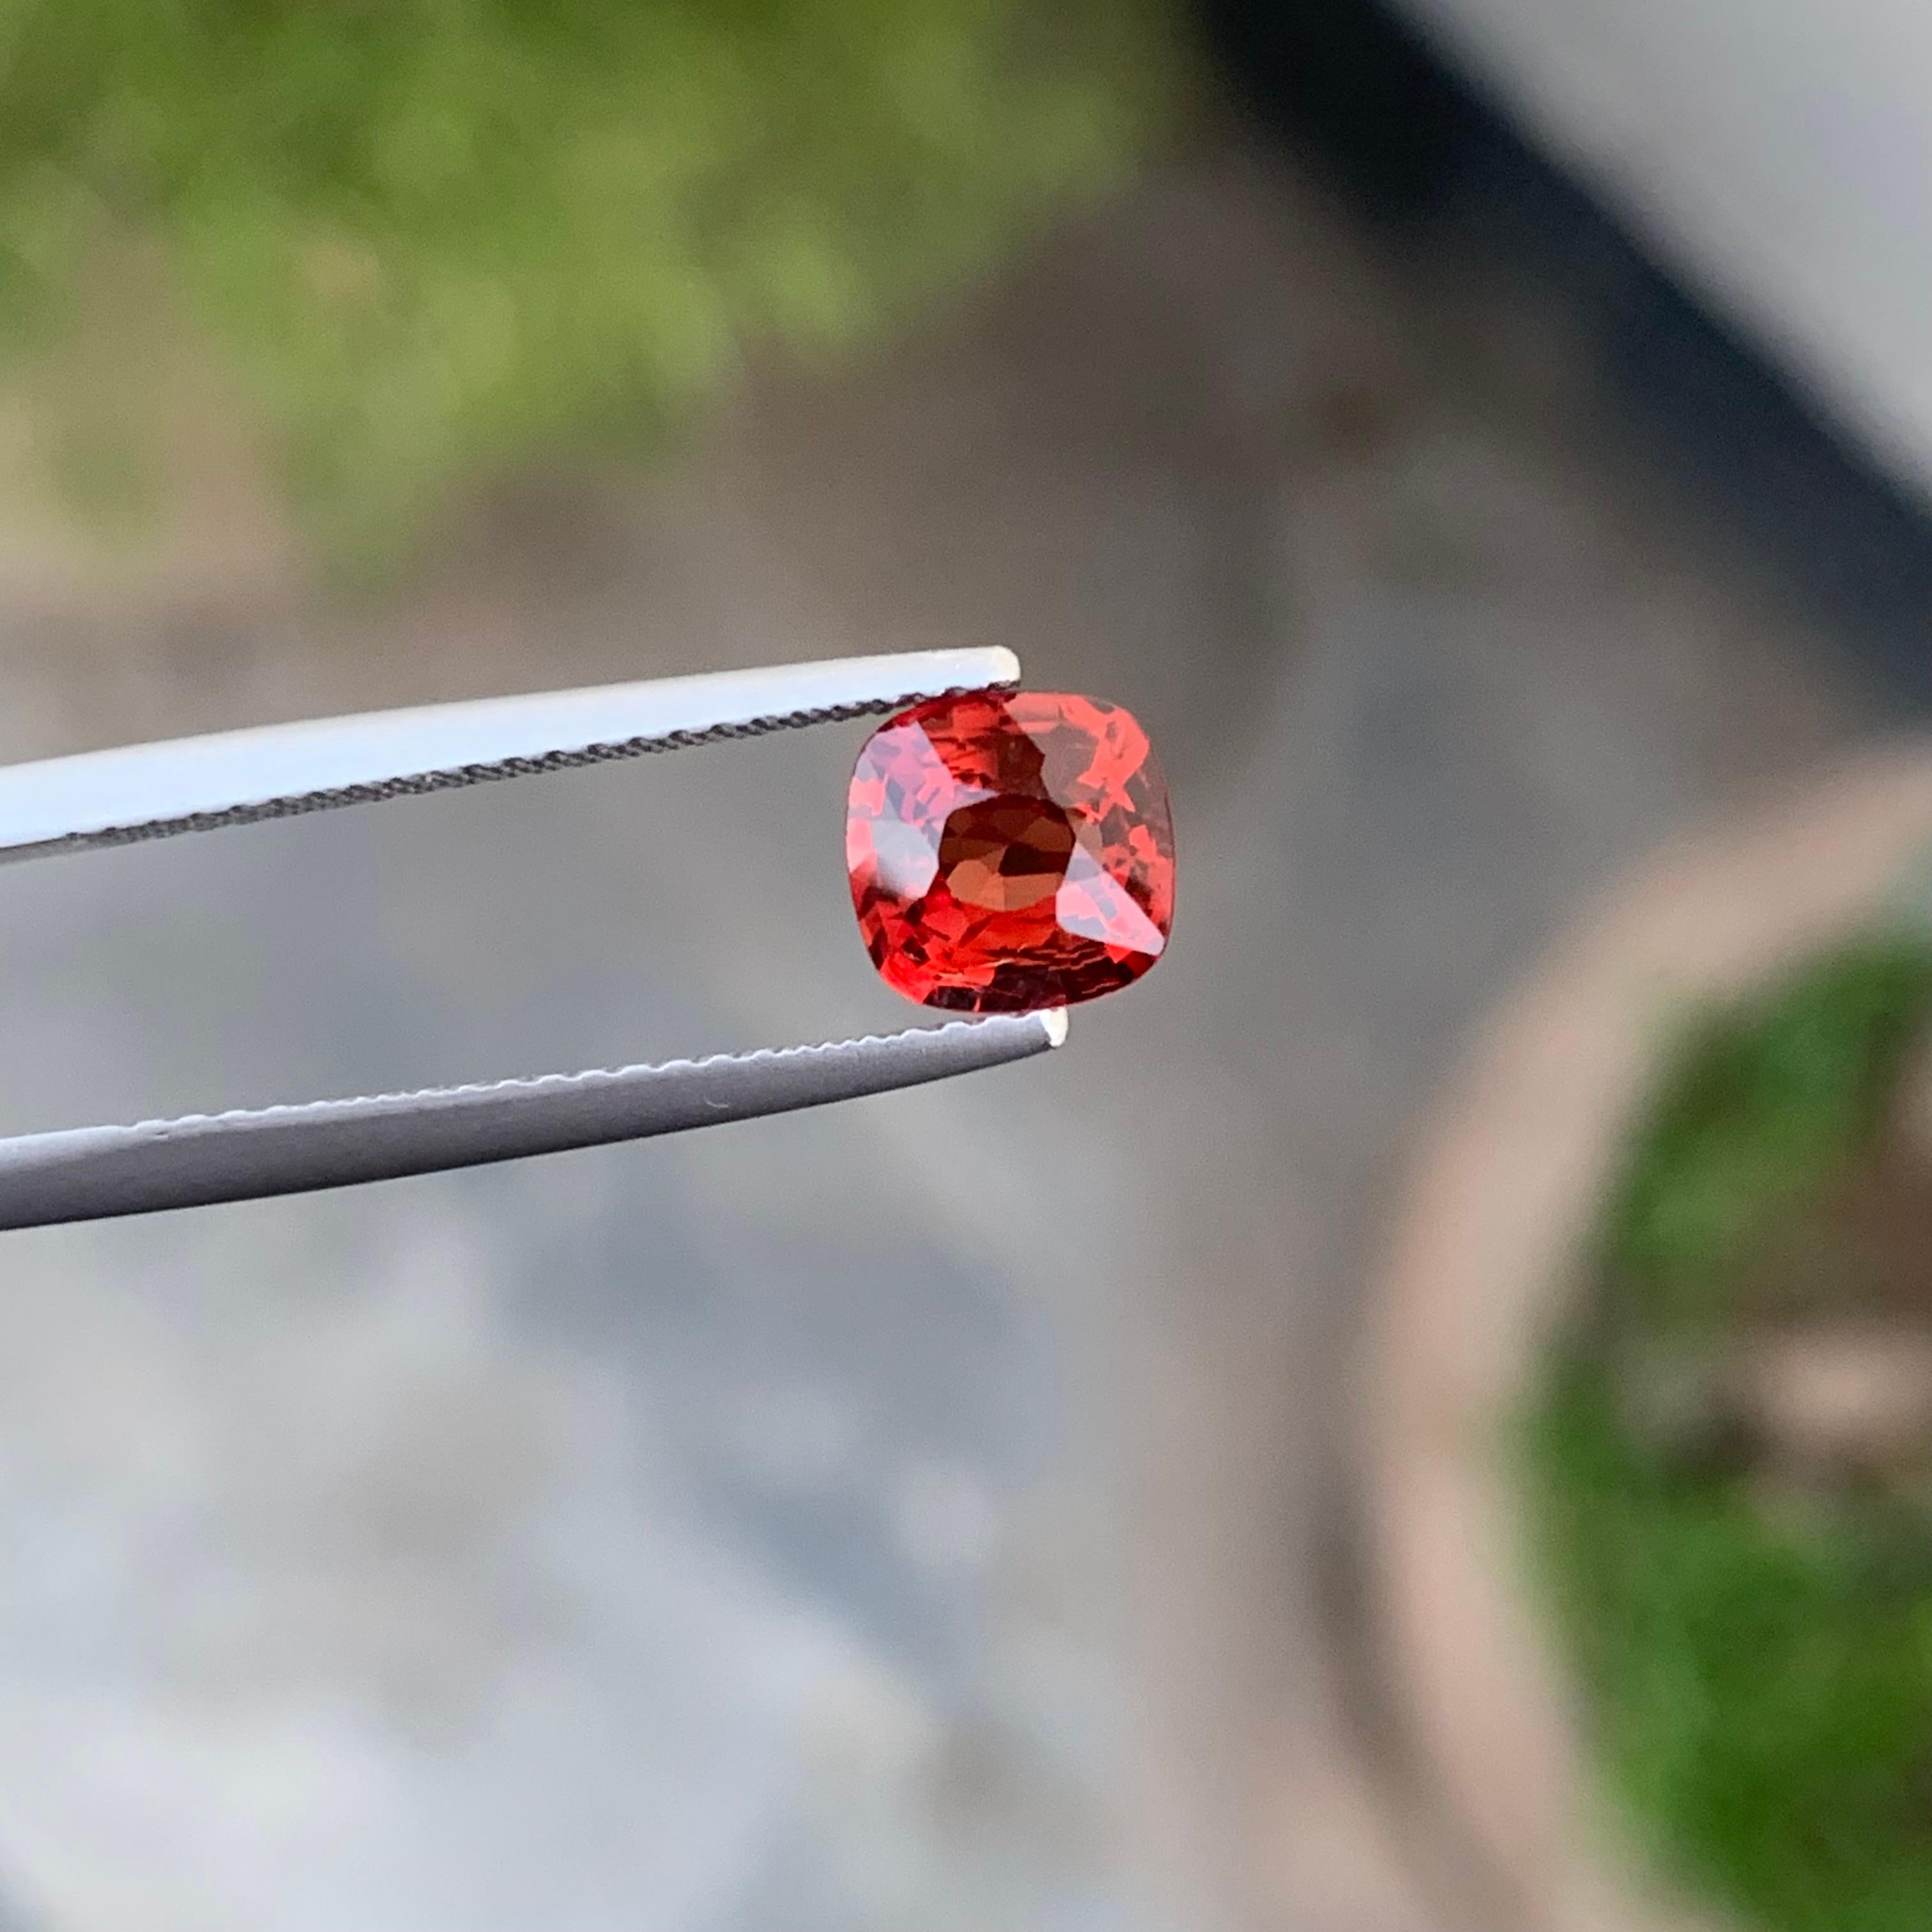 Arts and Crafts Charming 1.25 Carat Cushion Cut Loose Natural Red Spinel from Burma Myanmar